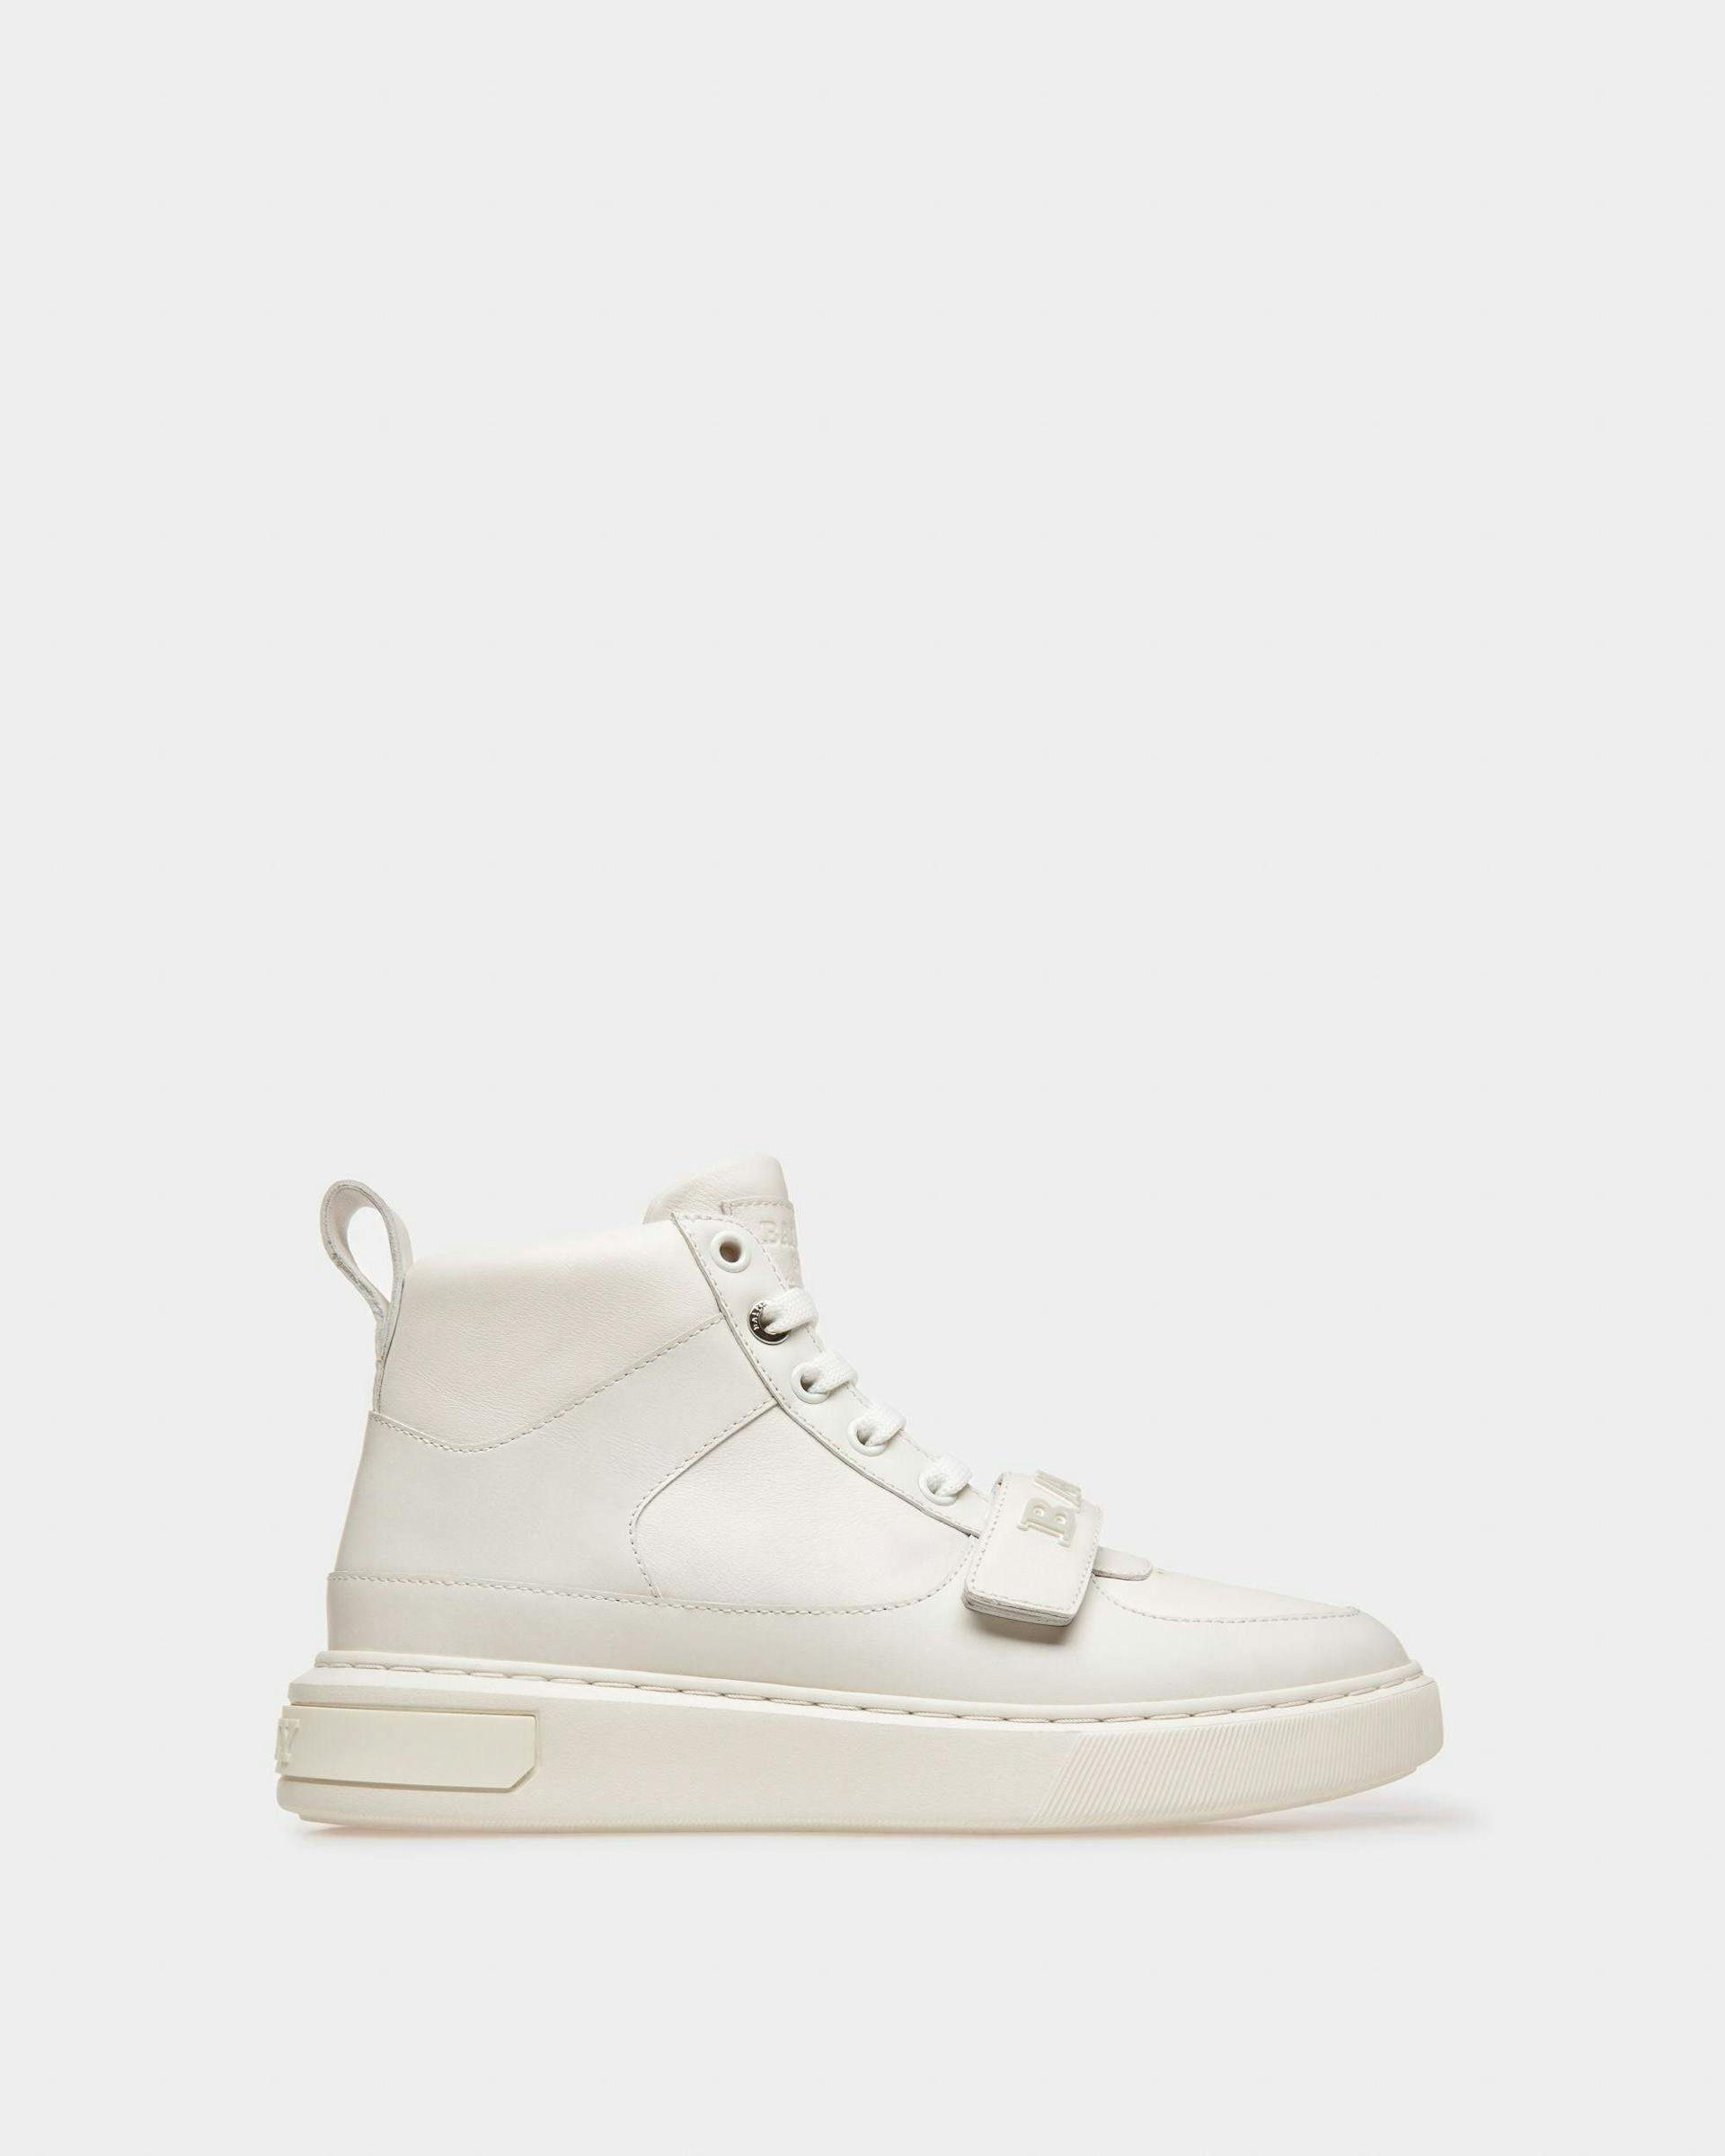 Merryk Leather Sneakers In White - Women's - Bally - 01